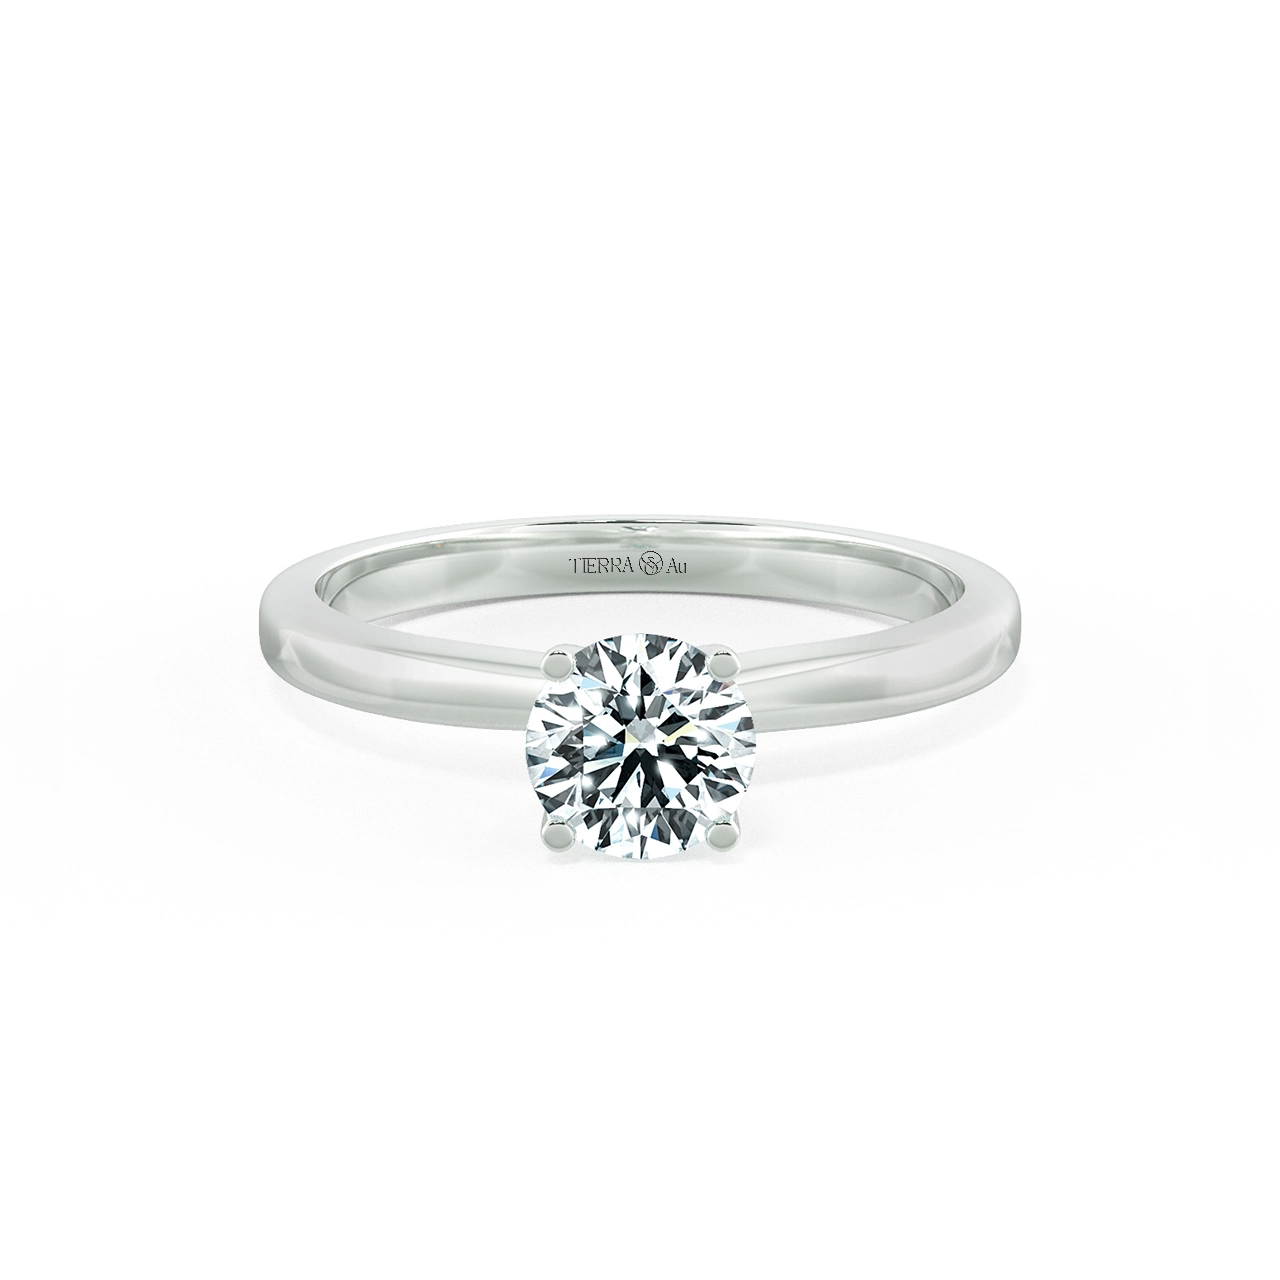 Simple Four Prongs Trellis Engagement Ring NCH1401